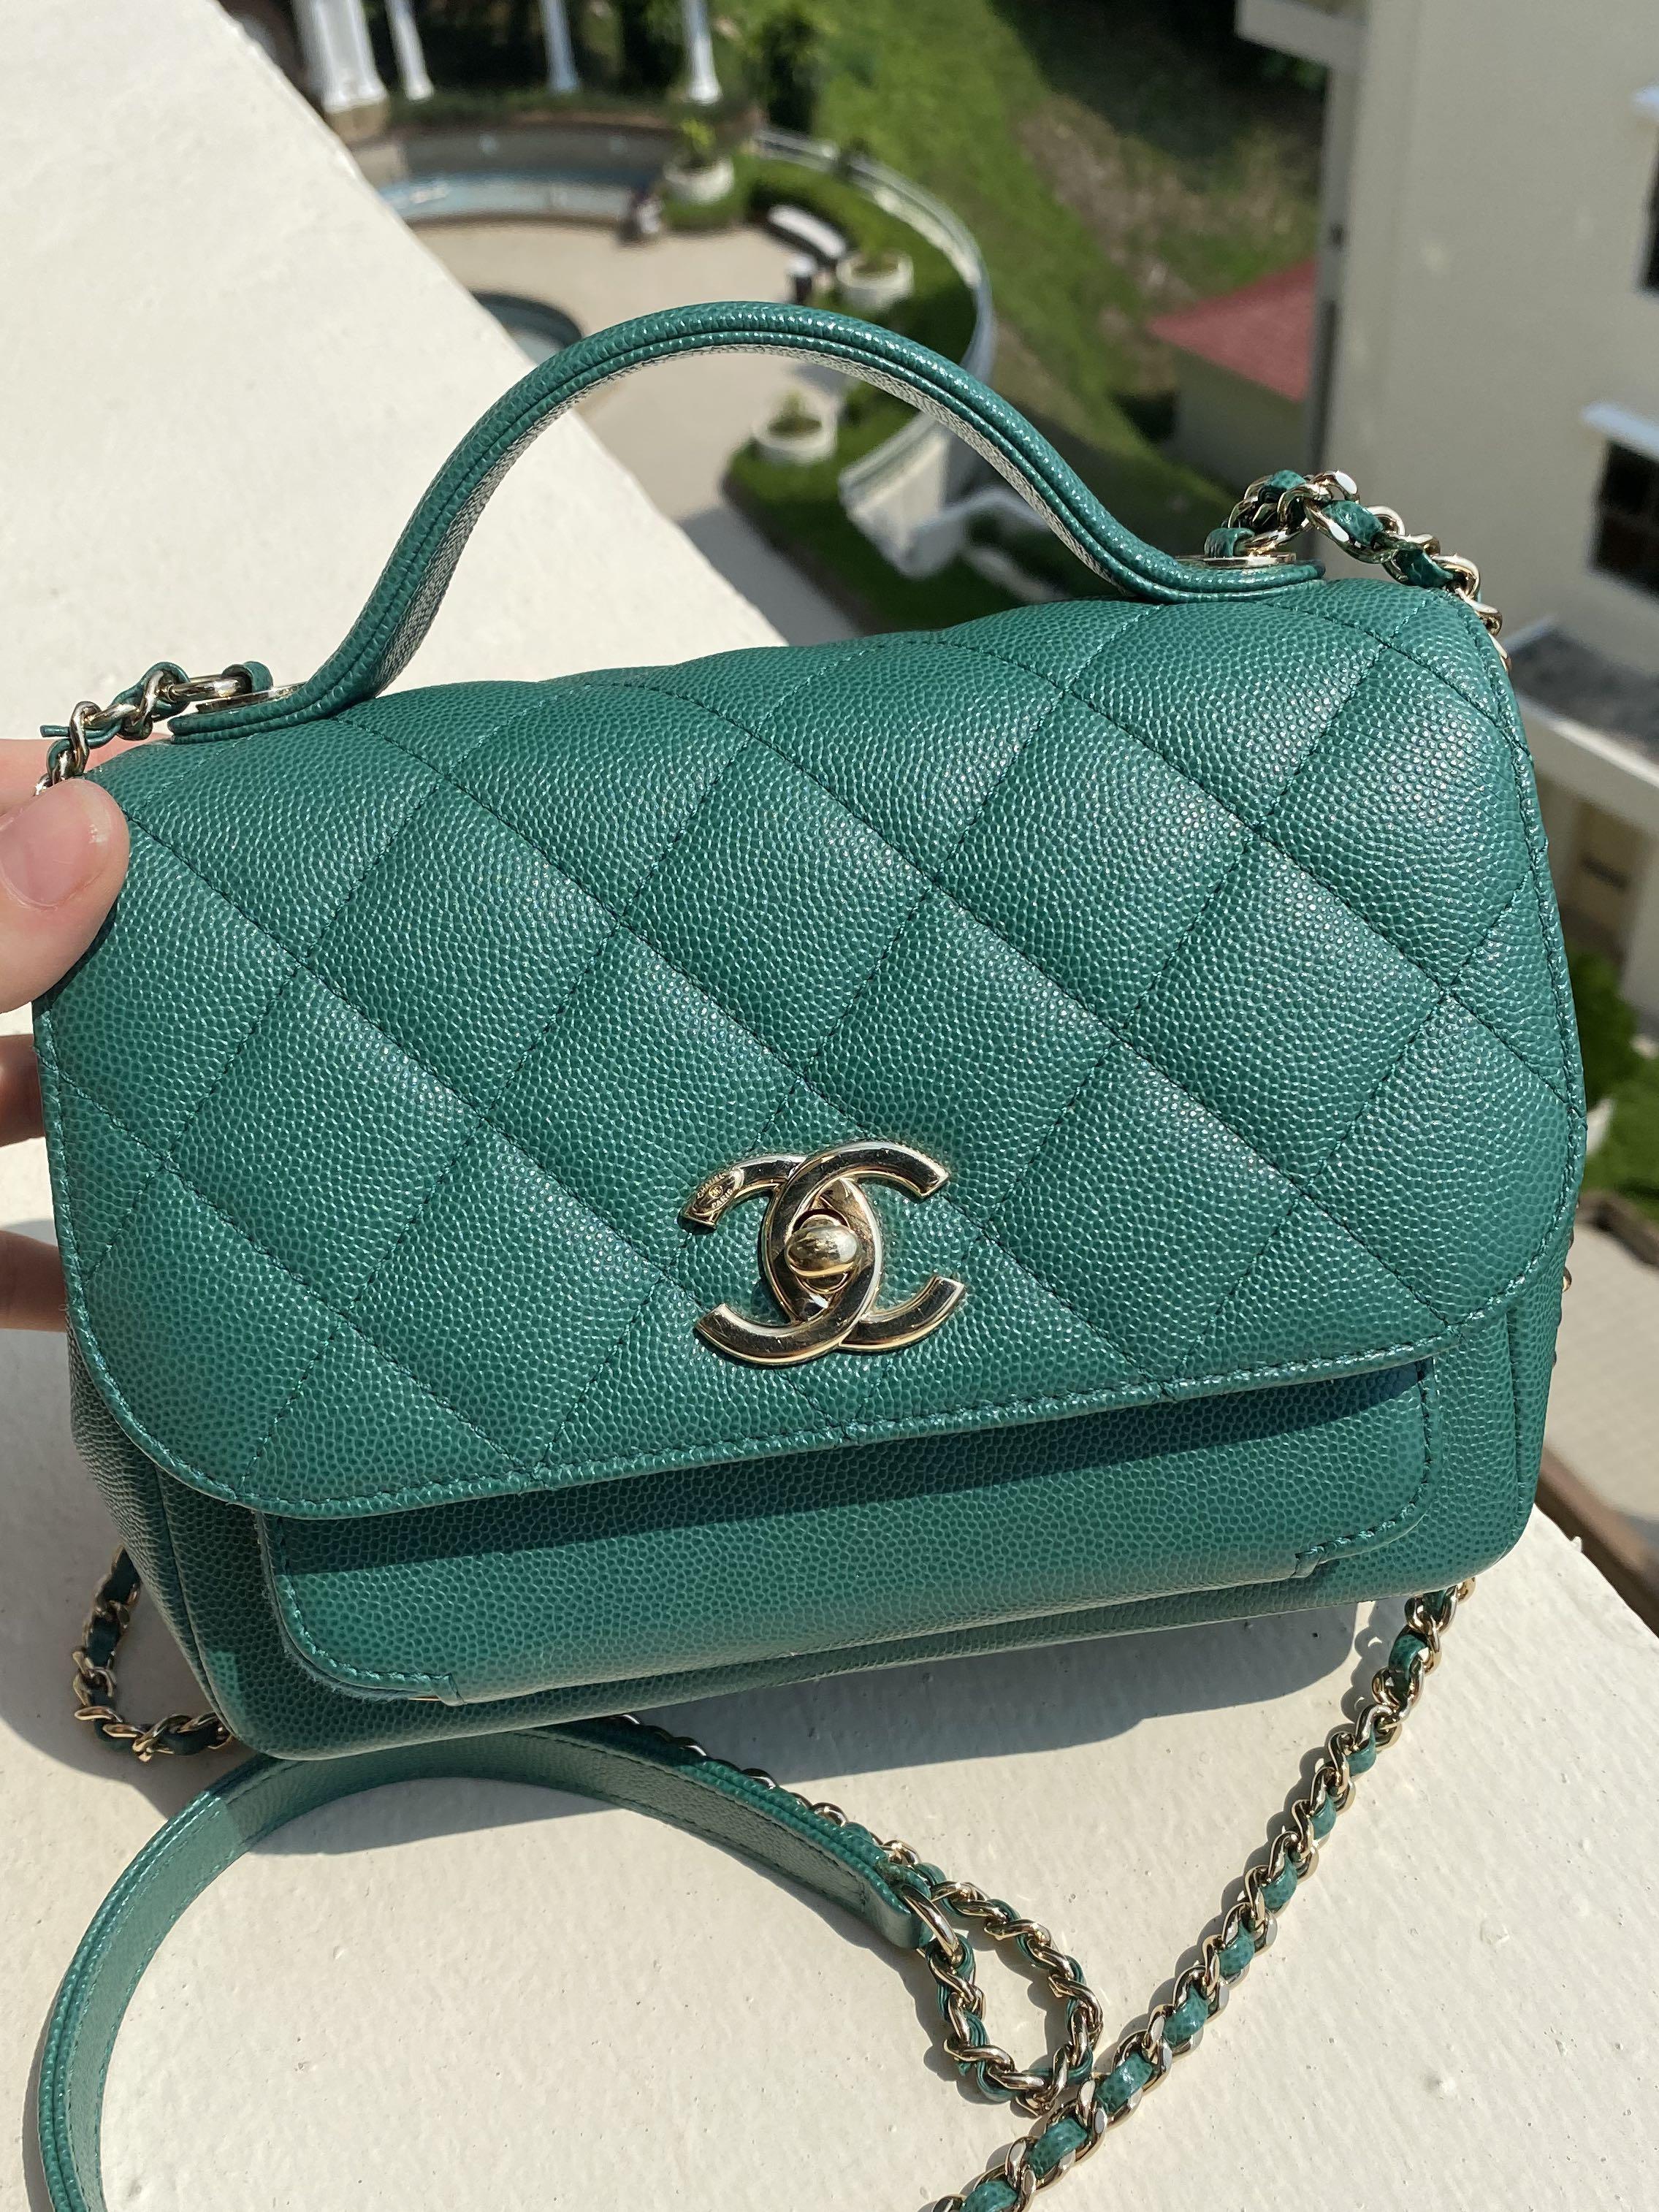 Chanel business affinity 18S emerald green